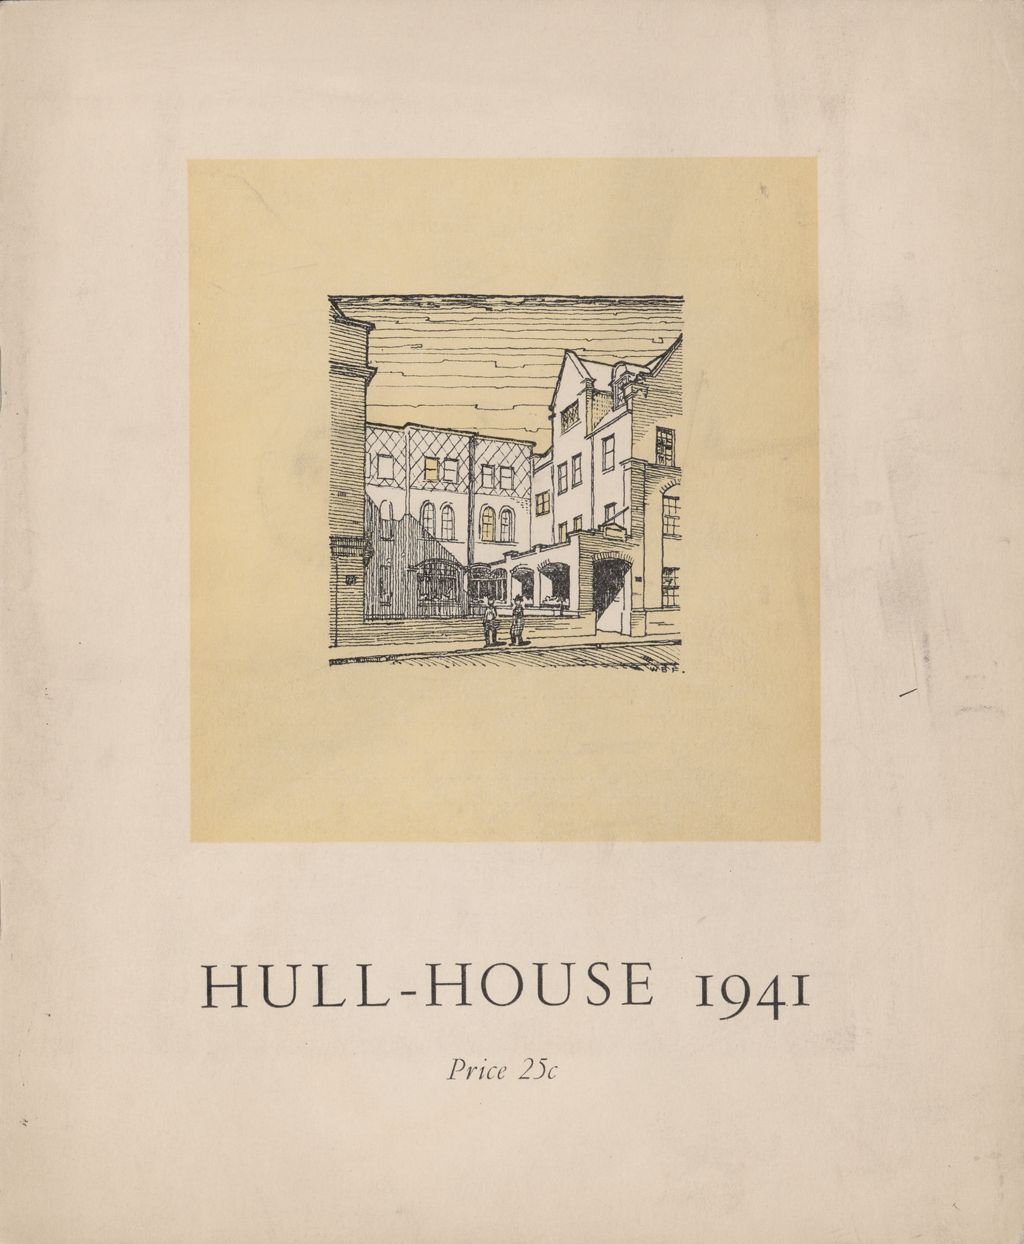 Miniature of Hull-House Year Book, 1941